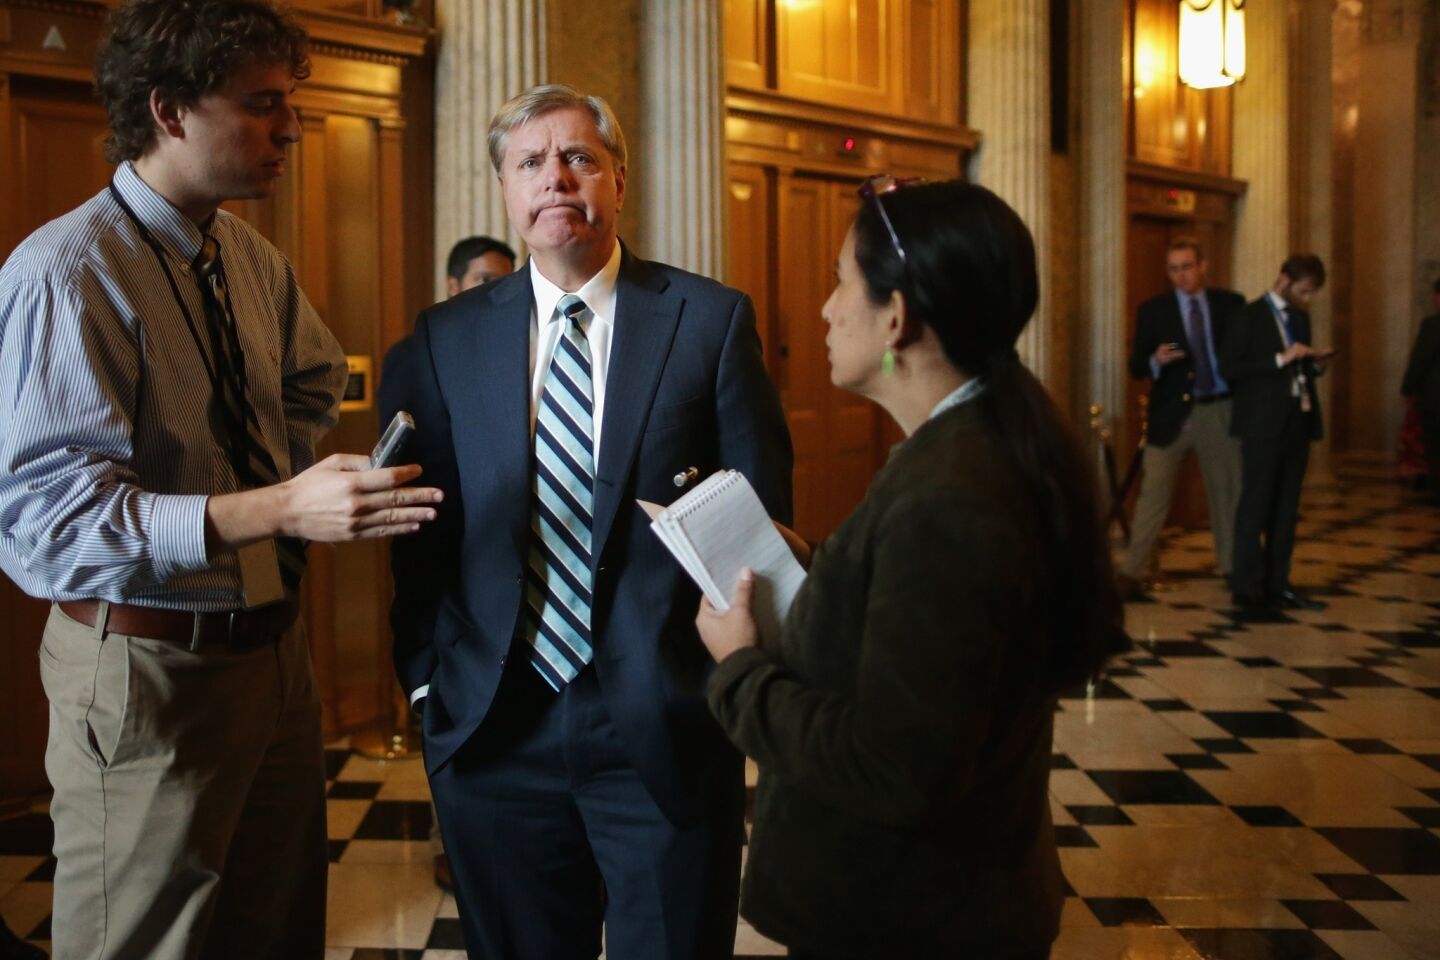 Sen. Lindsey Graham (R-S.C.) talks with reporters before attending the weekly Senate Republican Caucus policy luncheon at the Capitol.